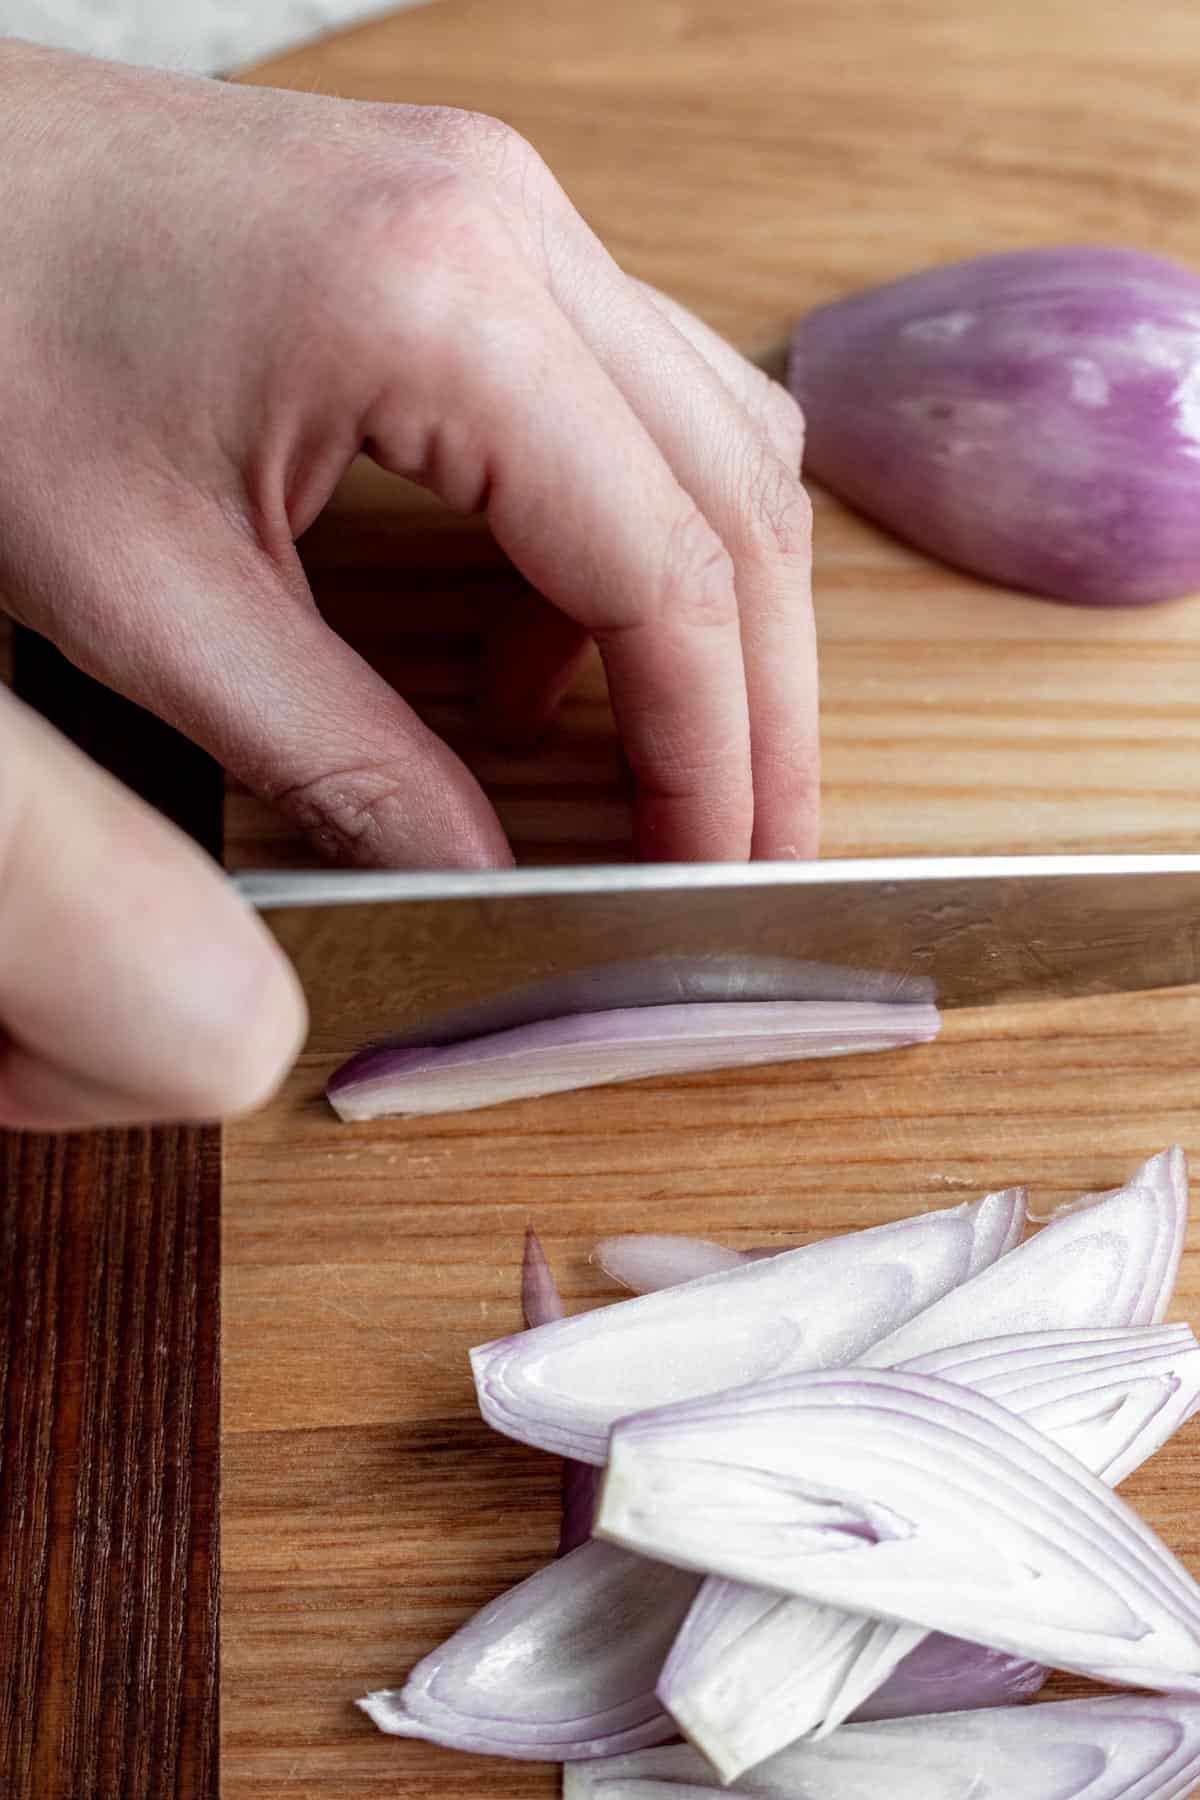 A chef's knife cutting a shallot into julienned strips.